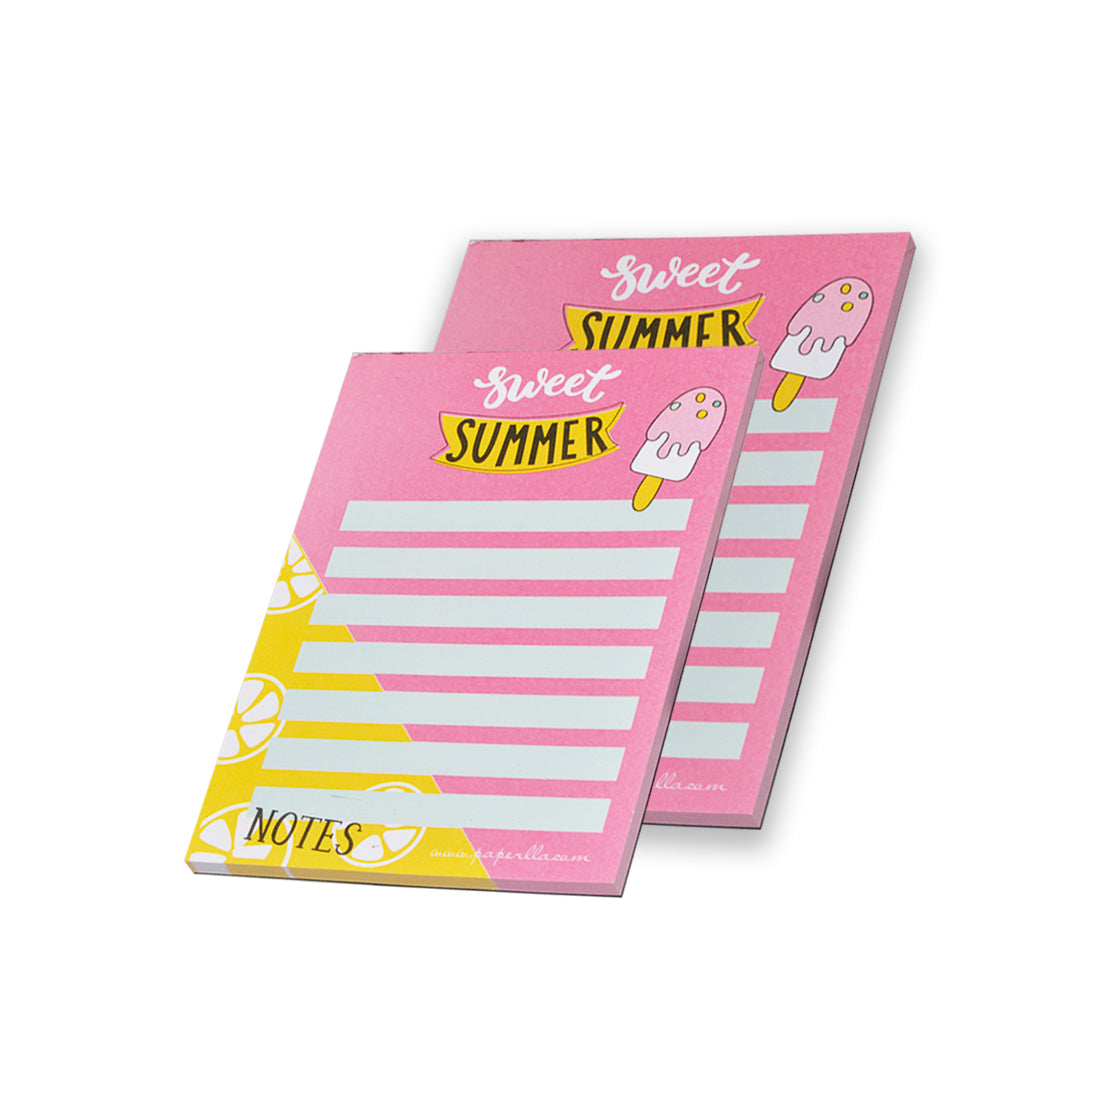 Paperlla CUTE STATIONERY Notepad | Easy Tear off Writing pad Set of 4